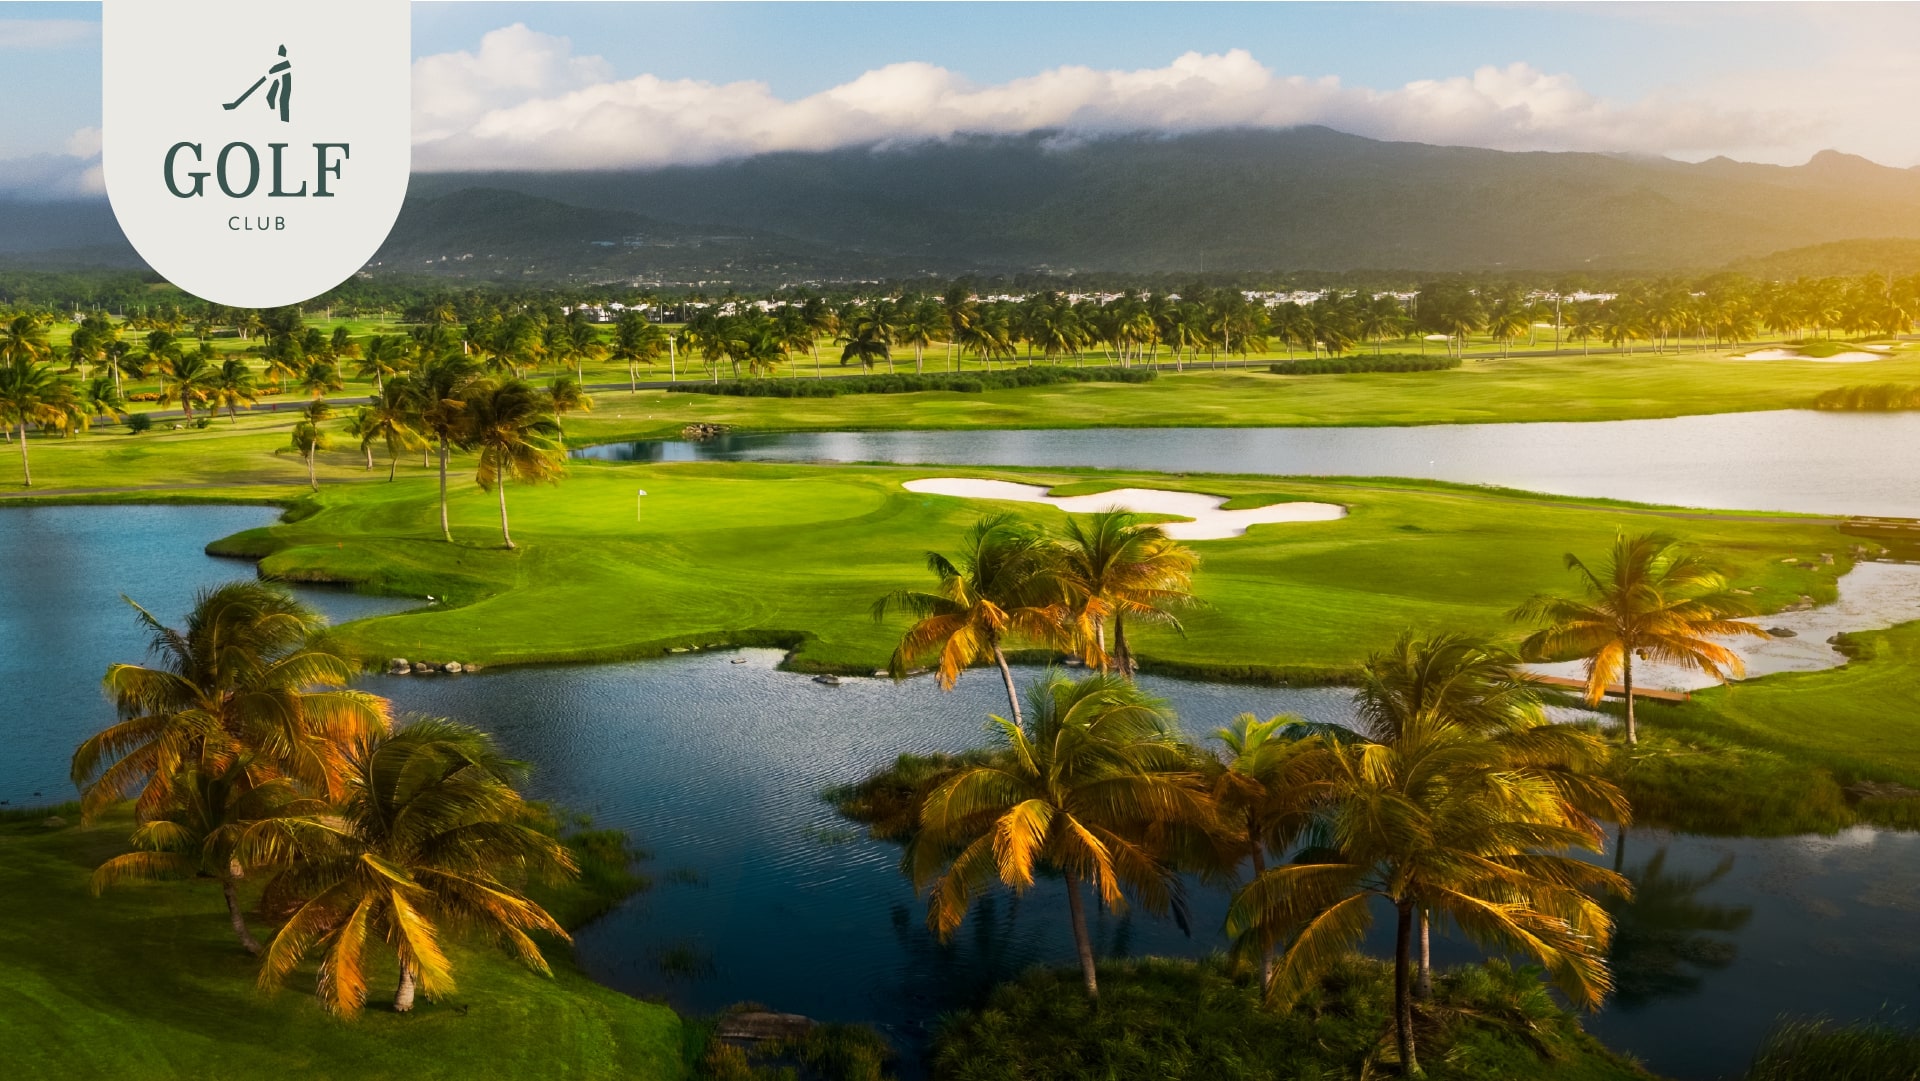 Aerial view of a lush green golf course with water features at Grand Reserve, surrounded by palm trees and mountains in the distance.